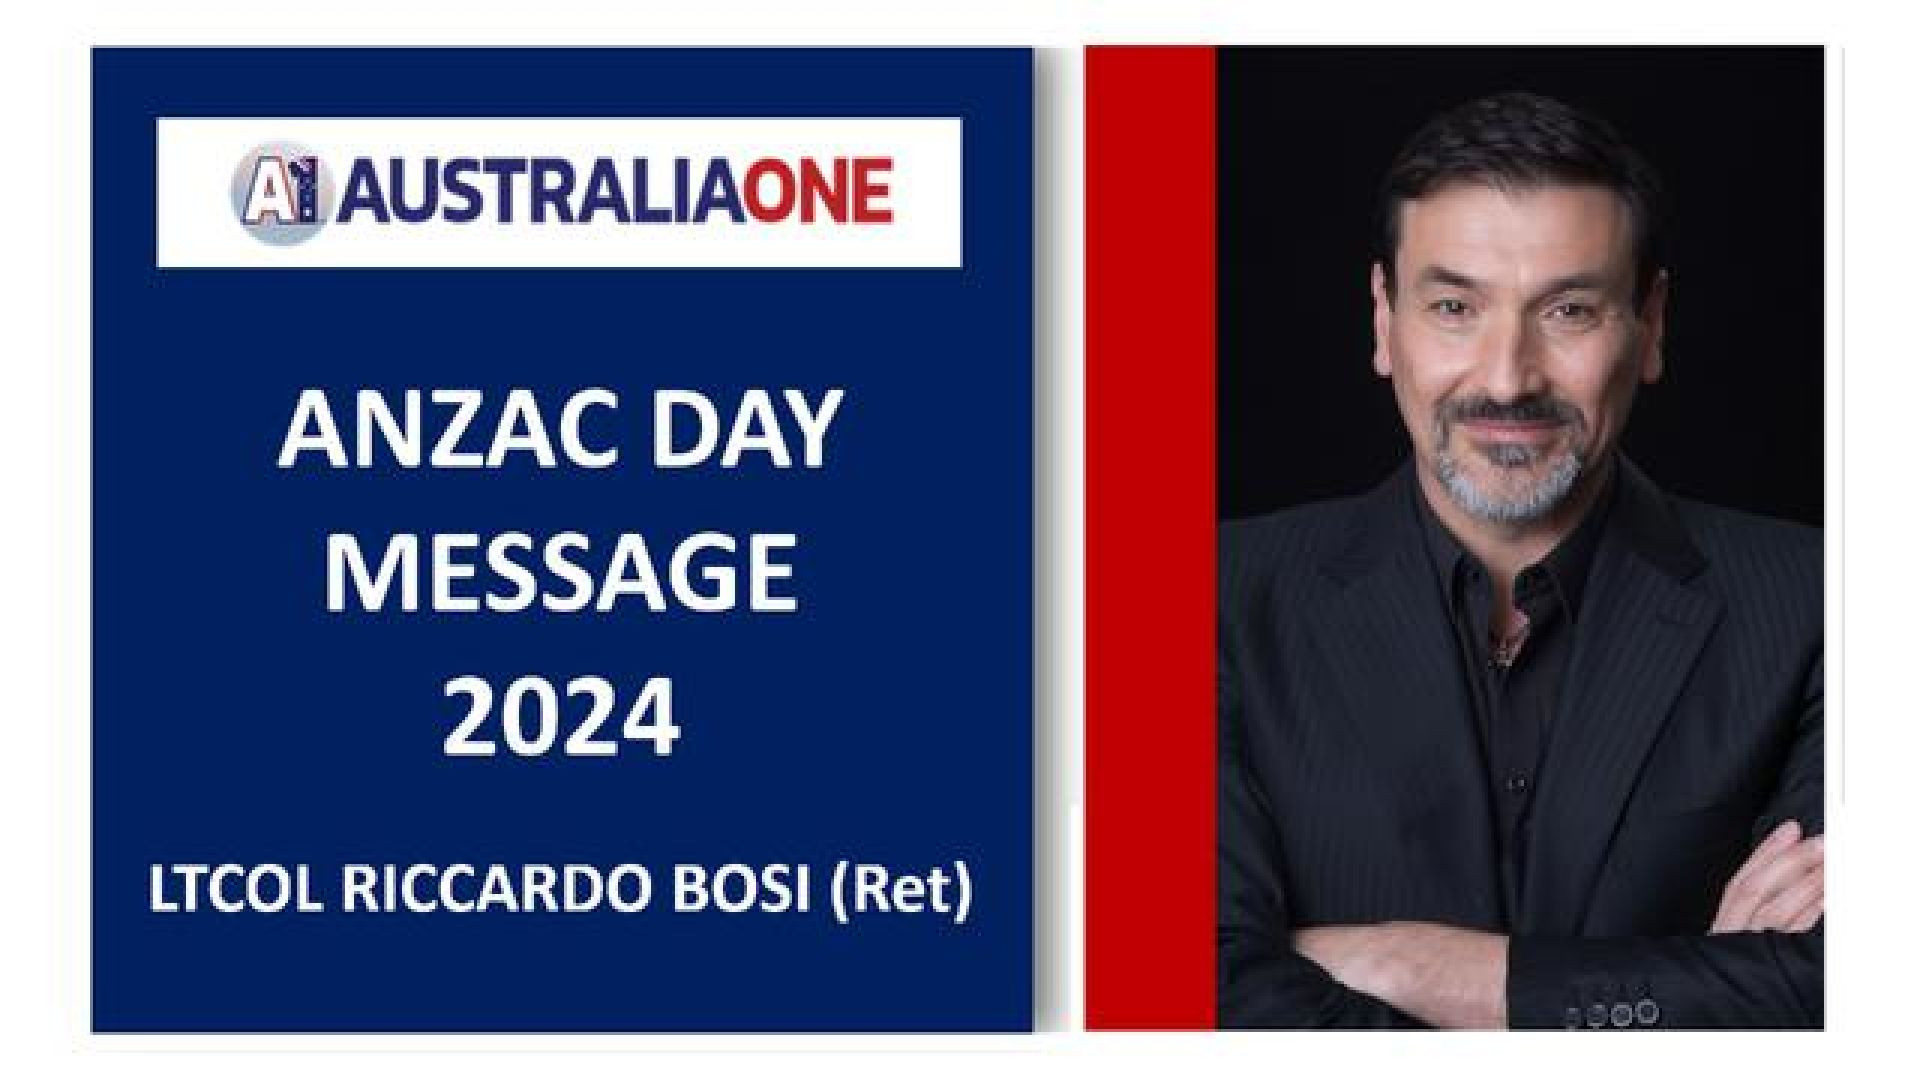 AustraliaOne Party (A1) - ANZAC Day Message (24 April 2024)